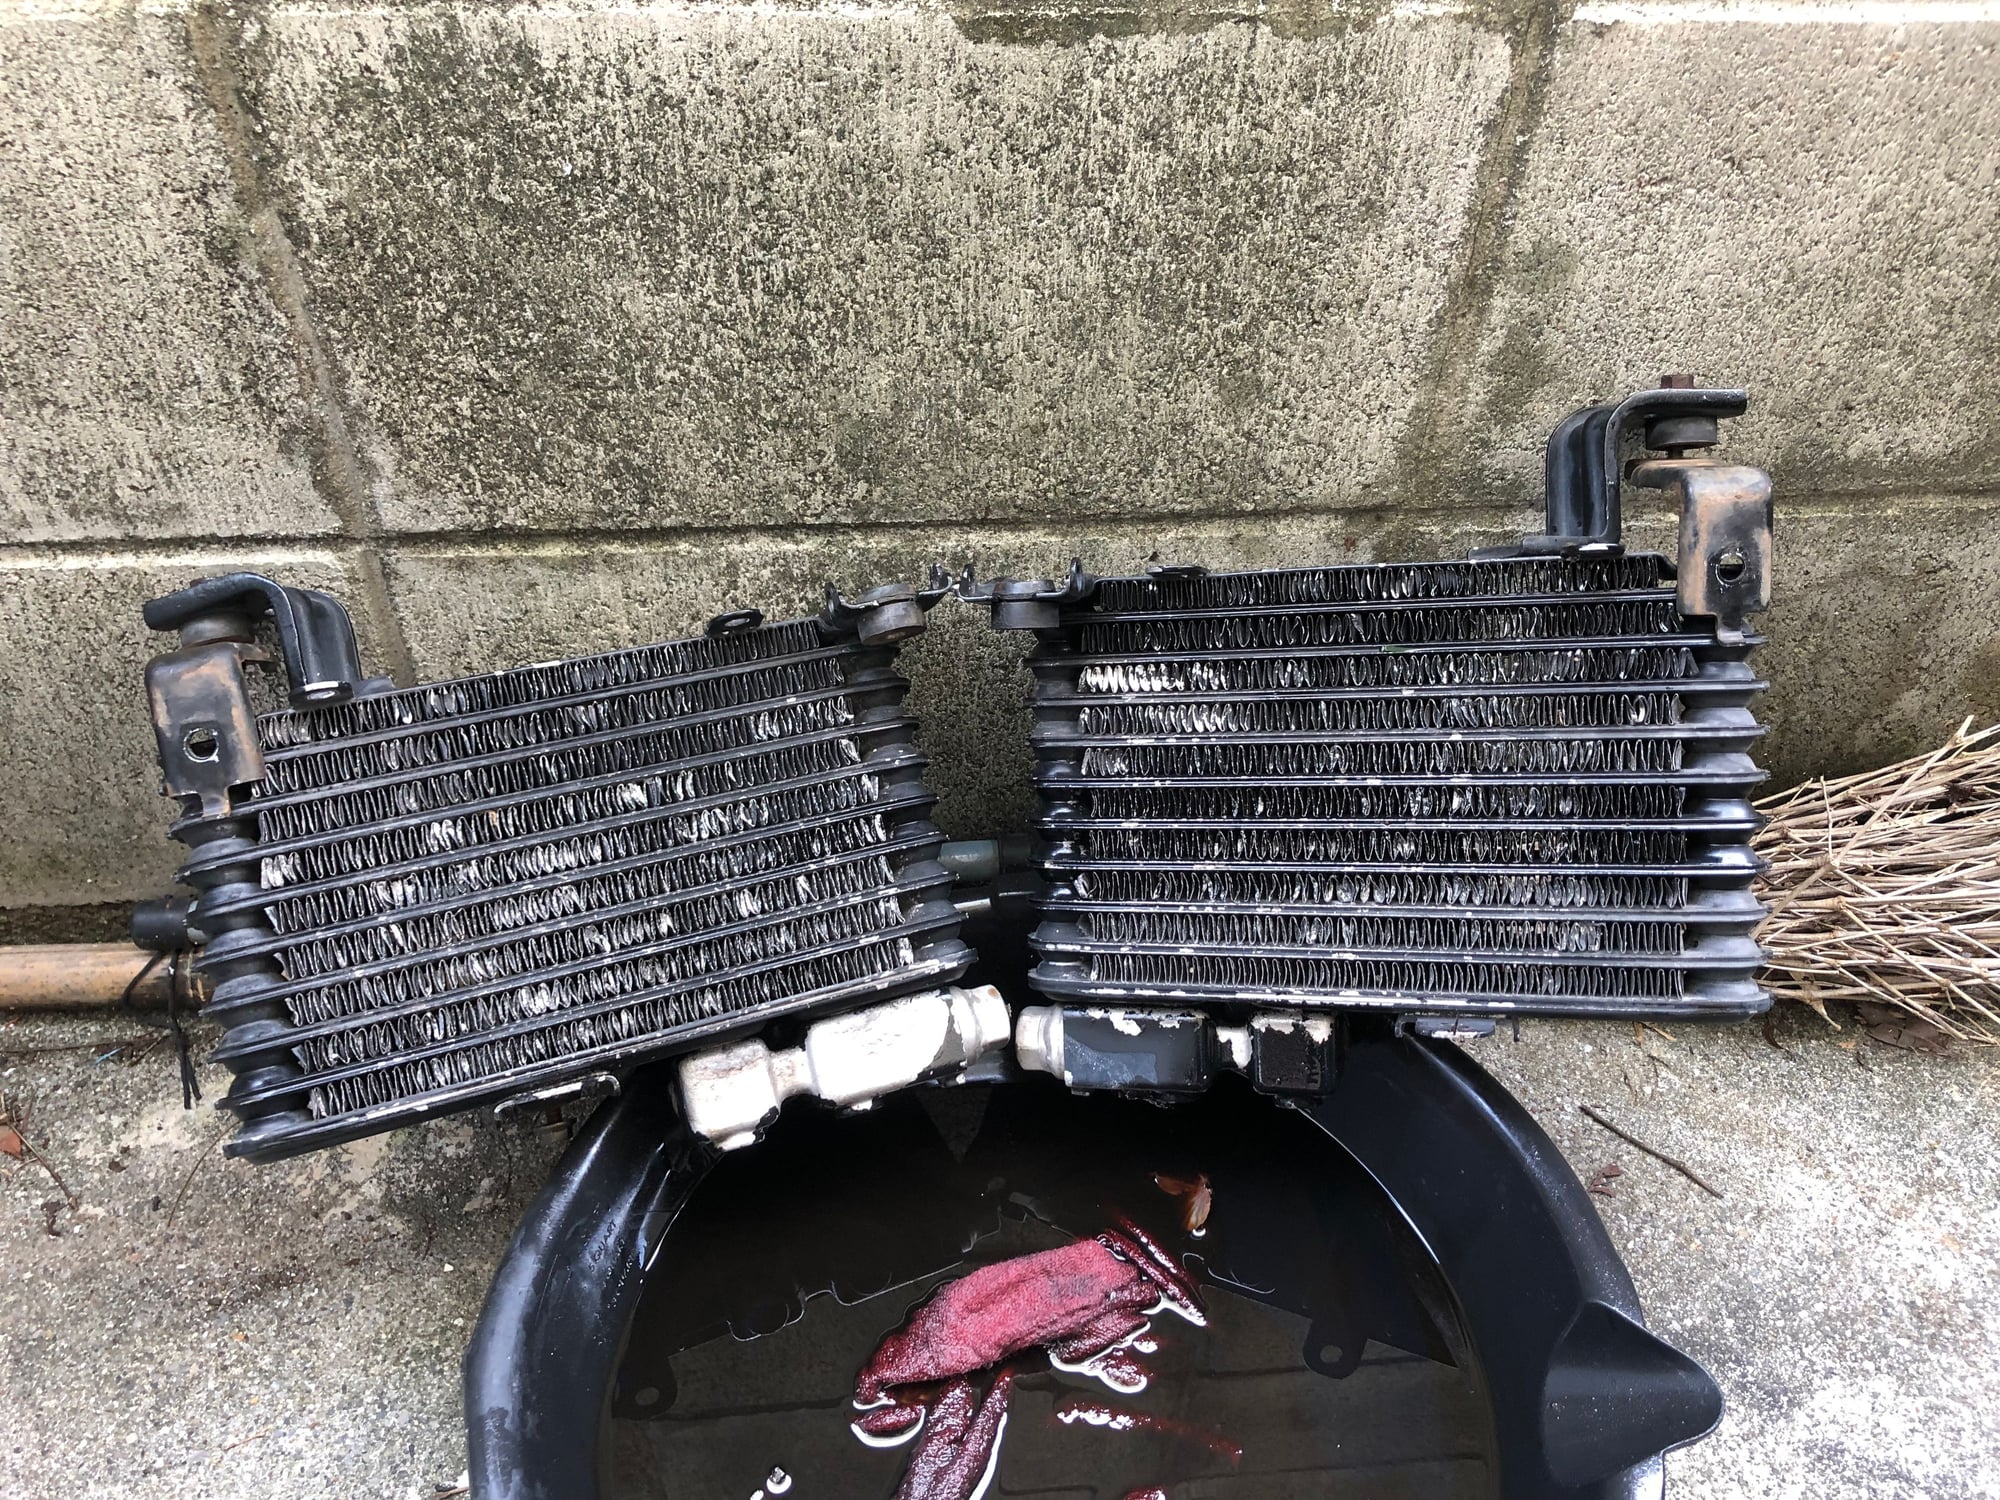 Miscellaneous - OEM Dual Oil Coolers - Used - 1993 to 2002 Mazda RX-7 - Okinawa, Japan